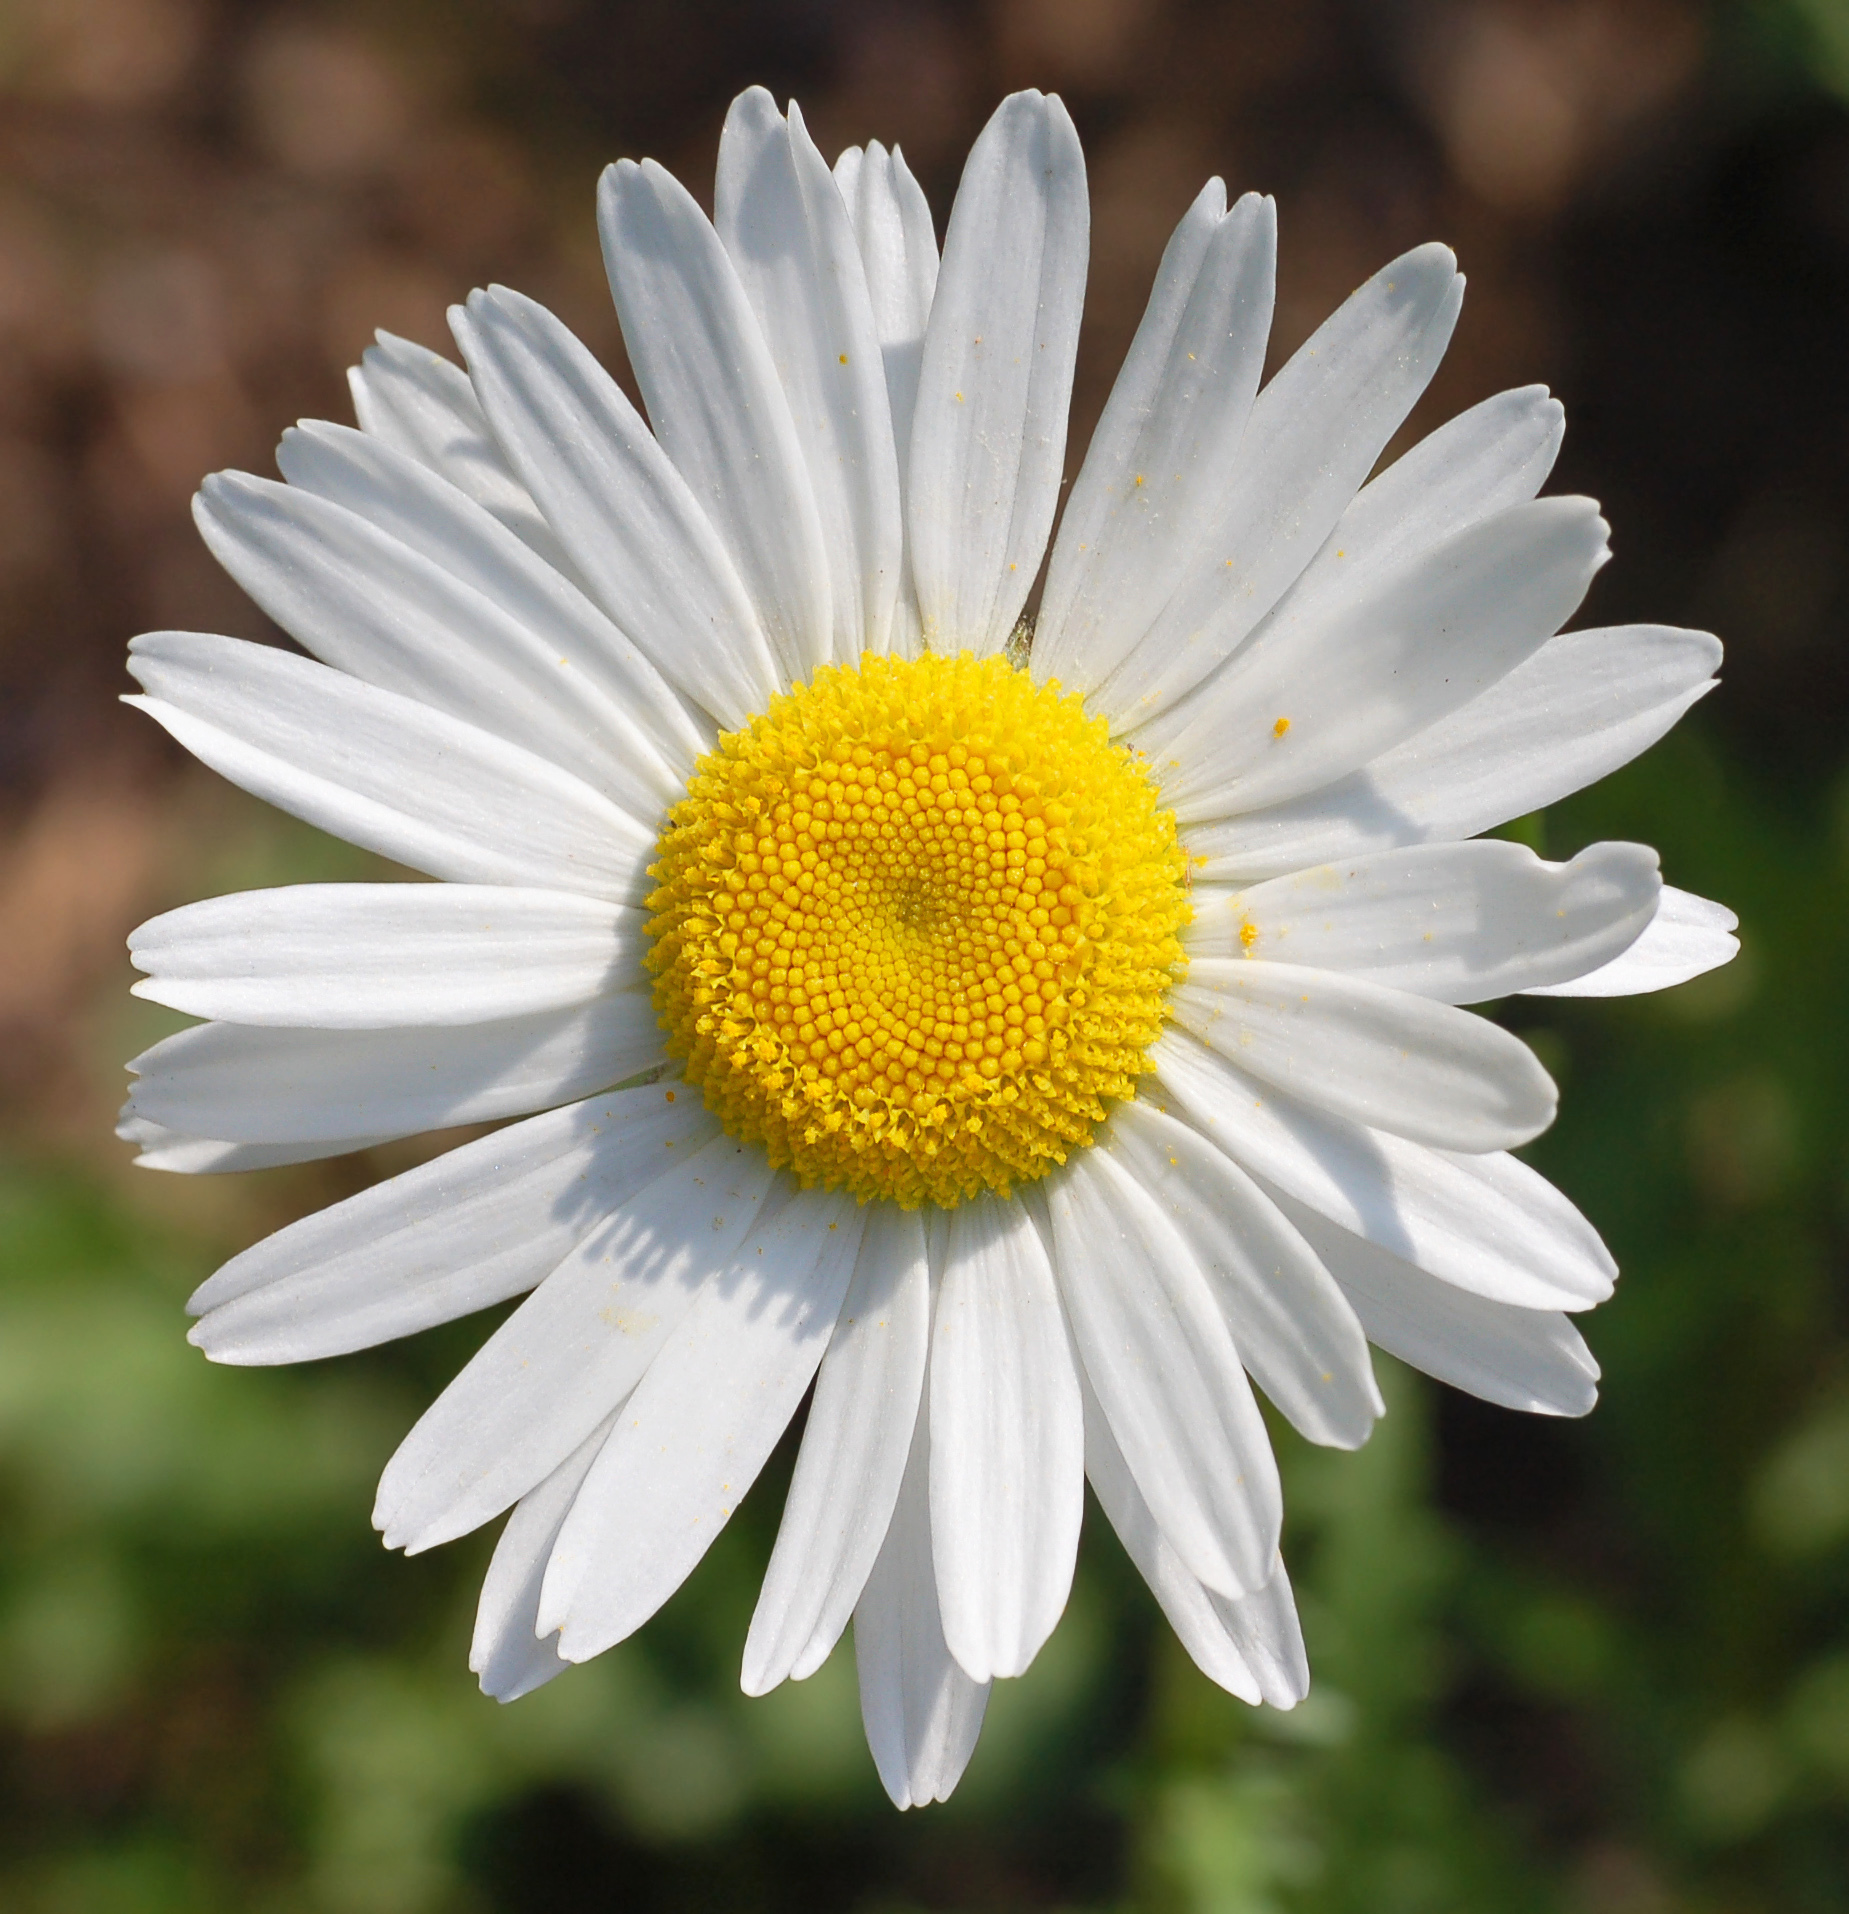 Images of Daisy | 1849x1914